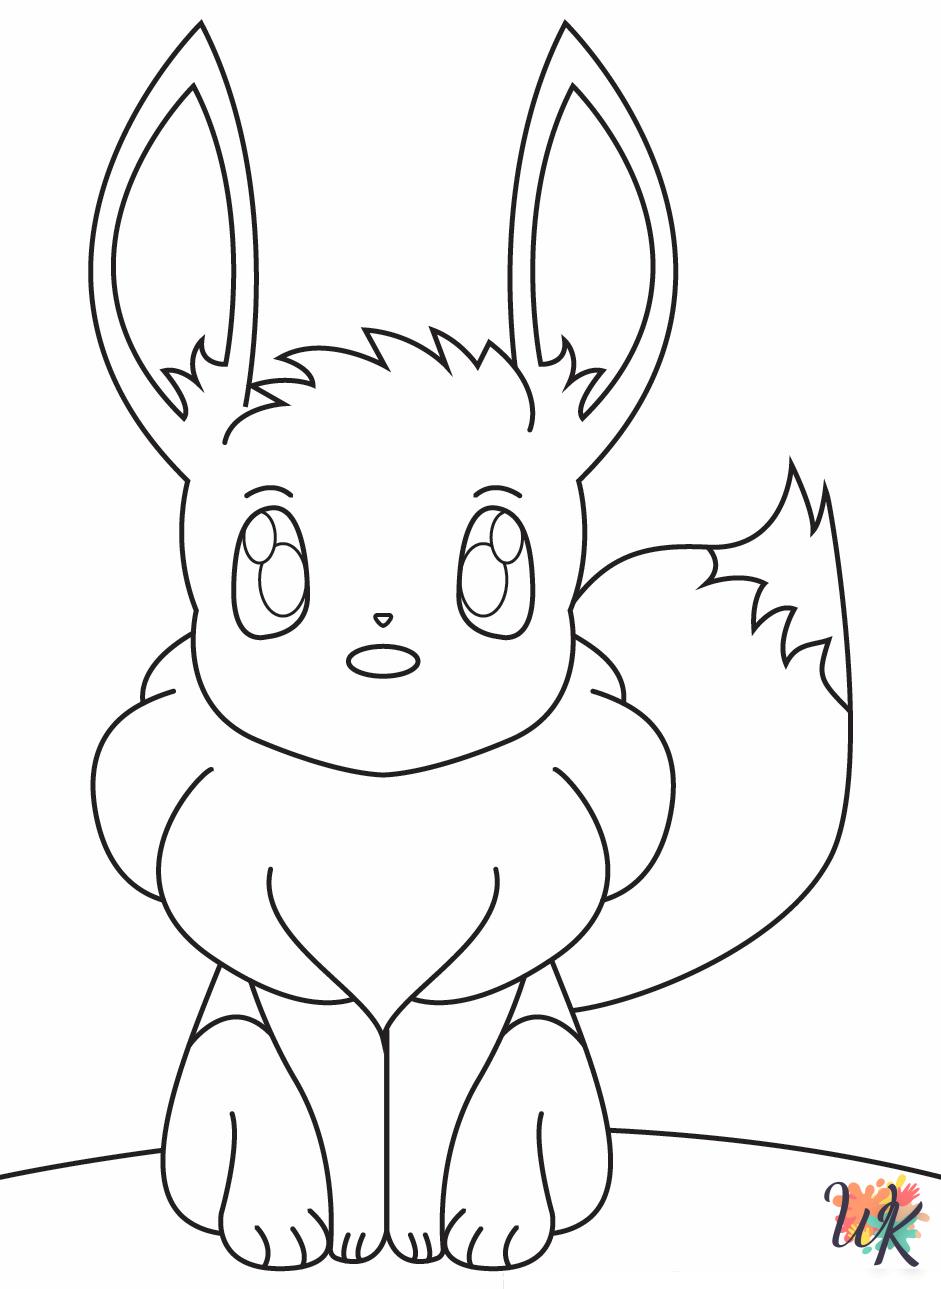 Eevee ornament coloring pages